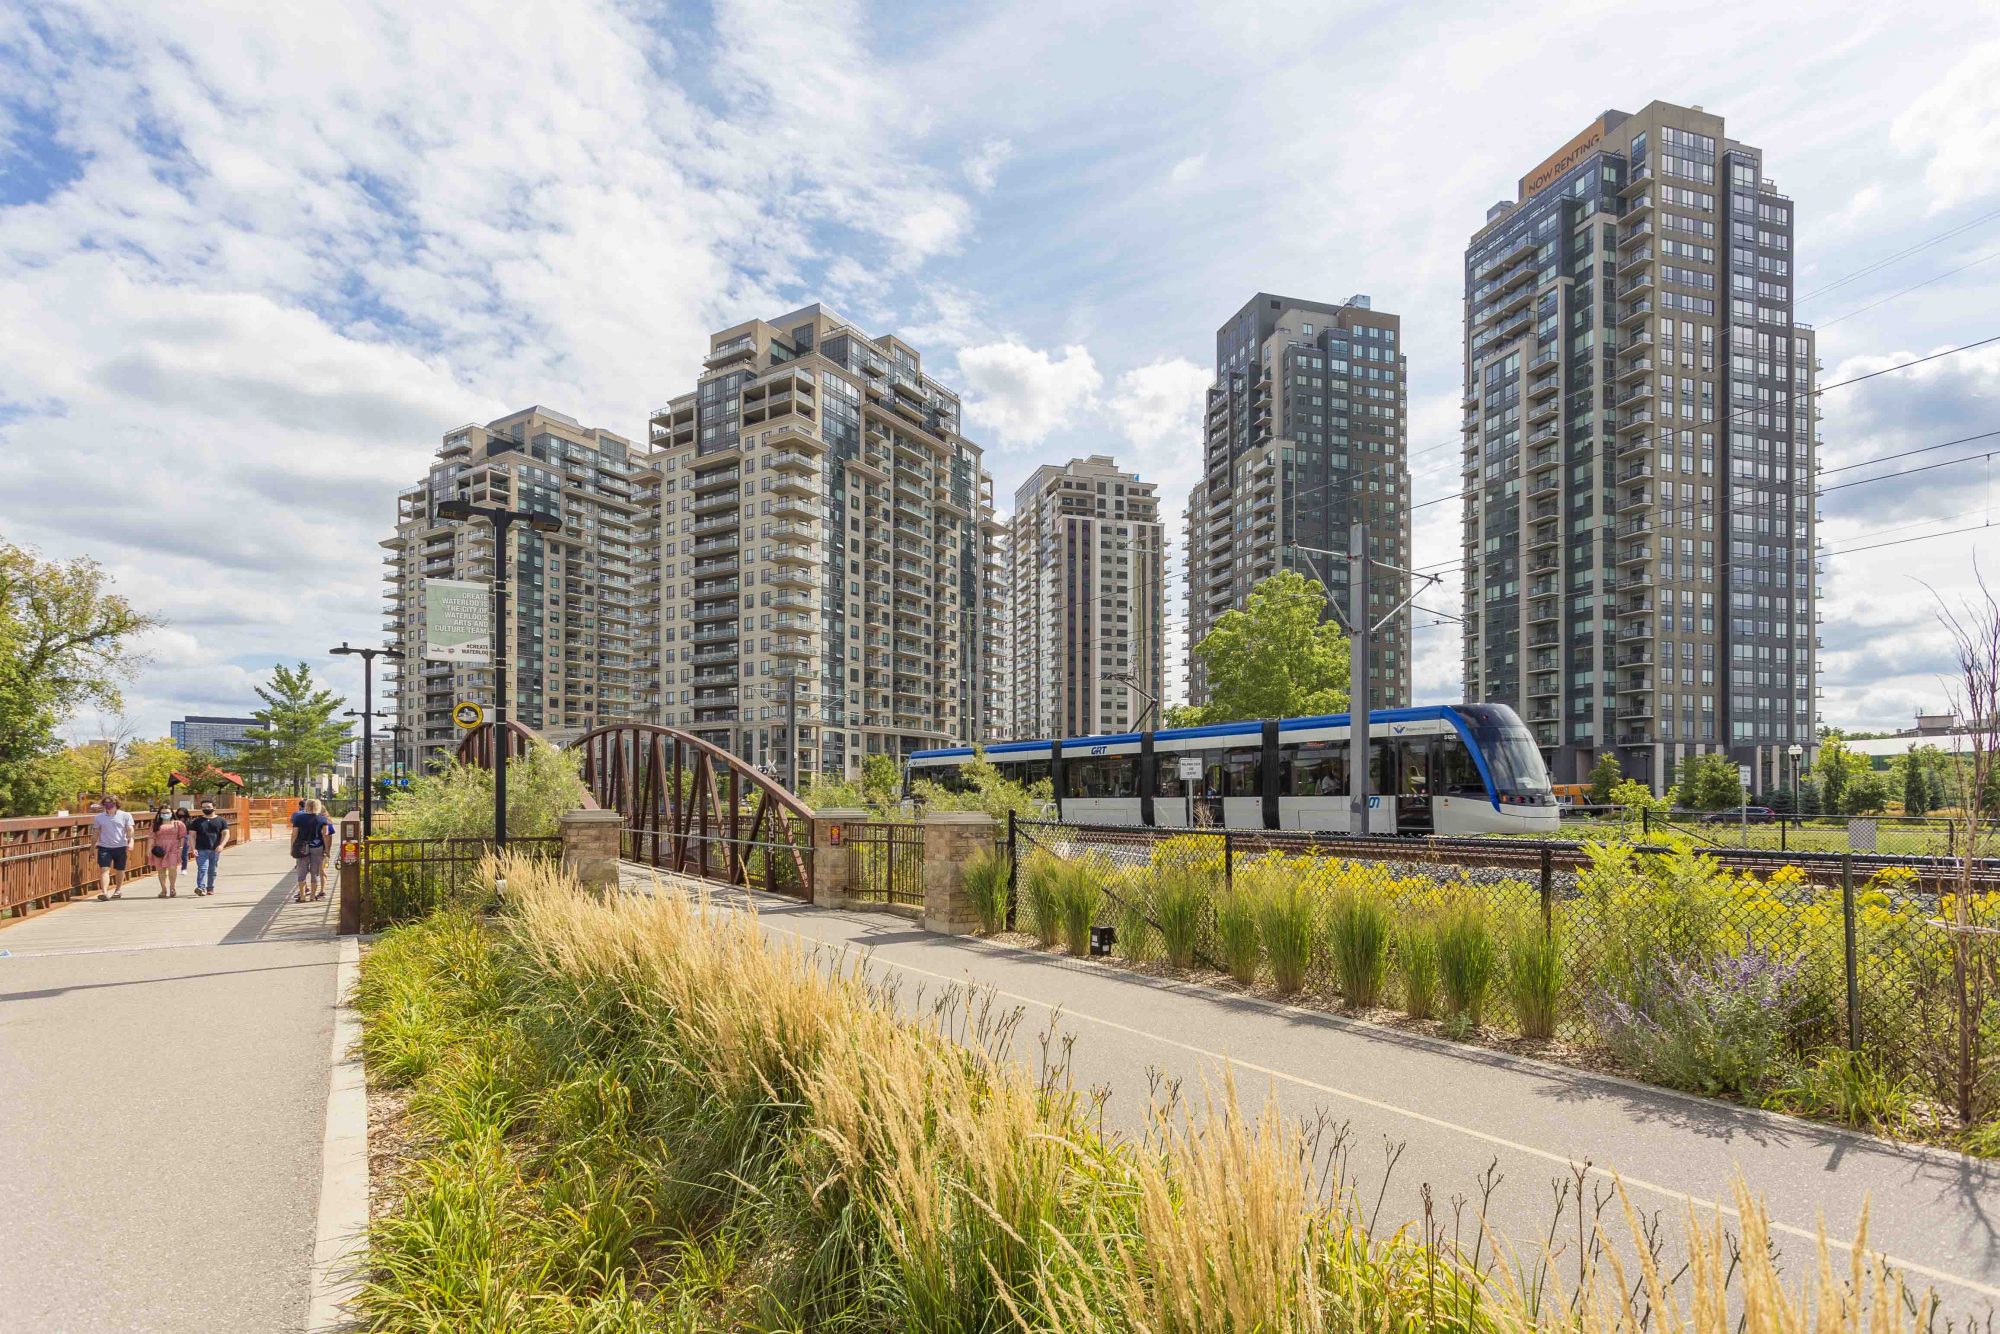 The ION Light Rail Transit train passes by the Barrel Yards residential complex in Uptown Waterloo.